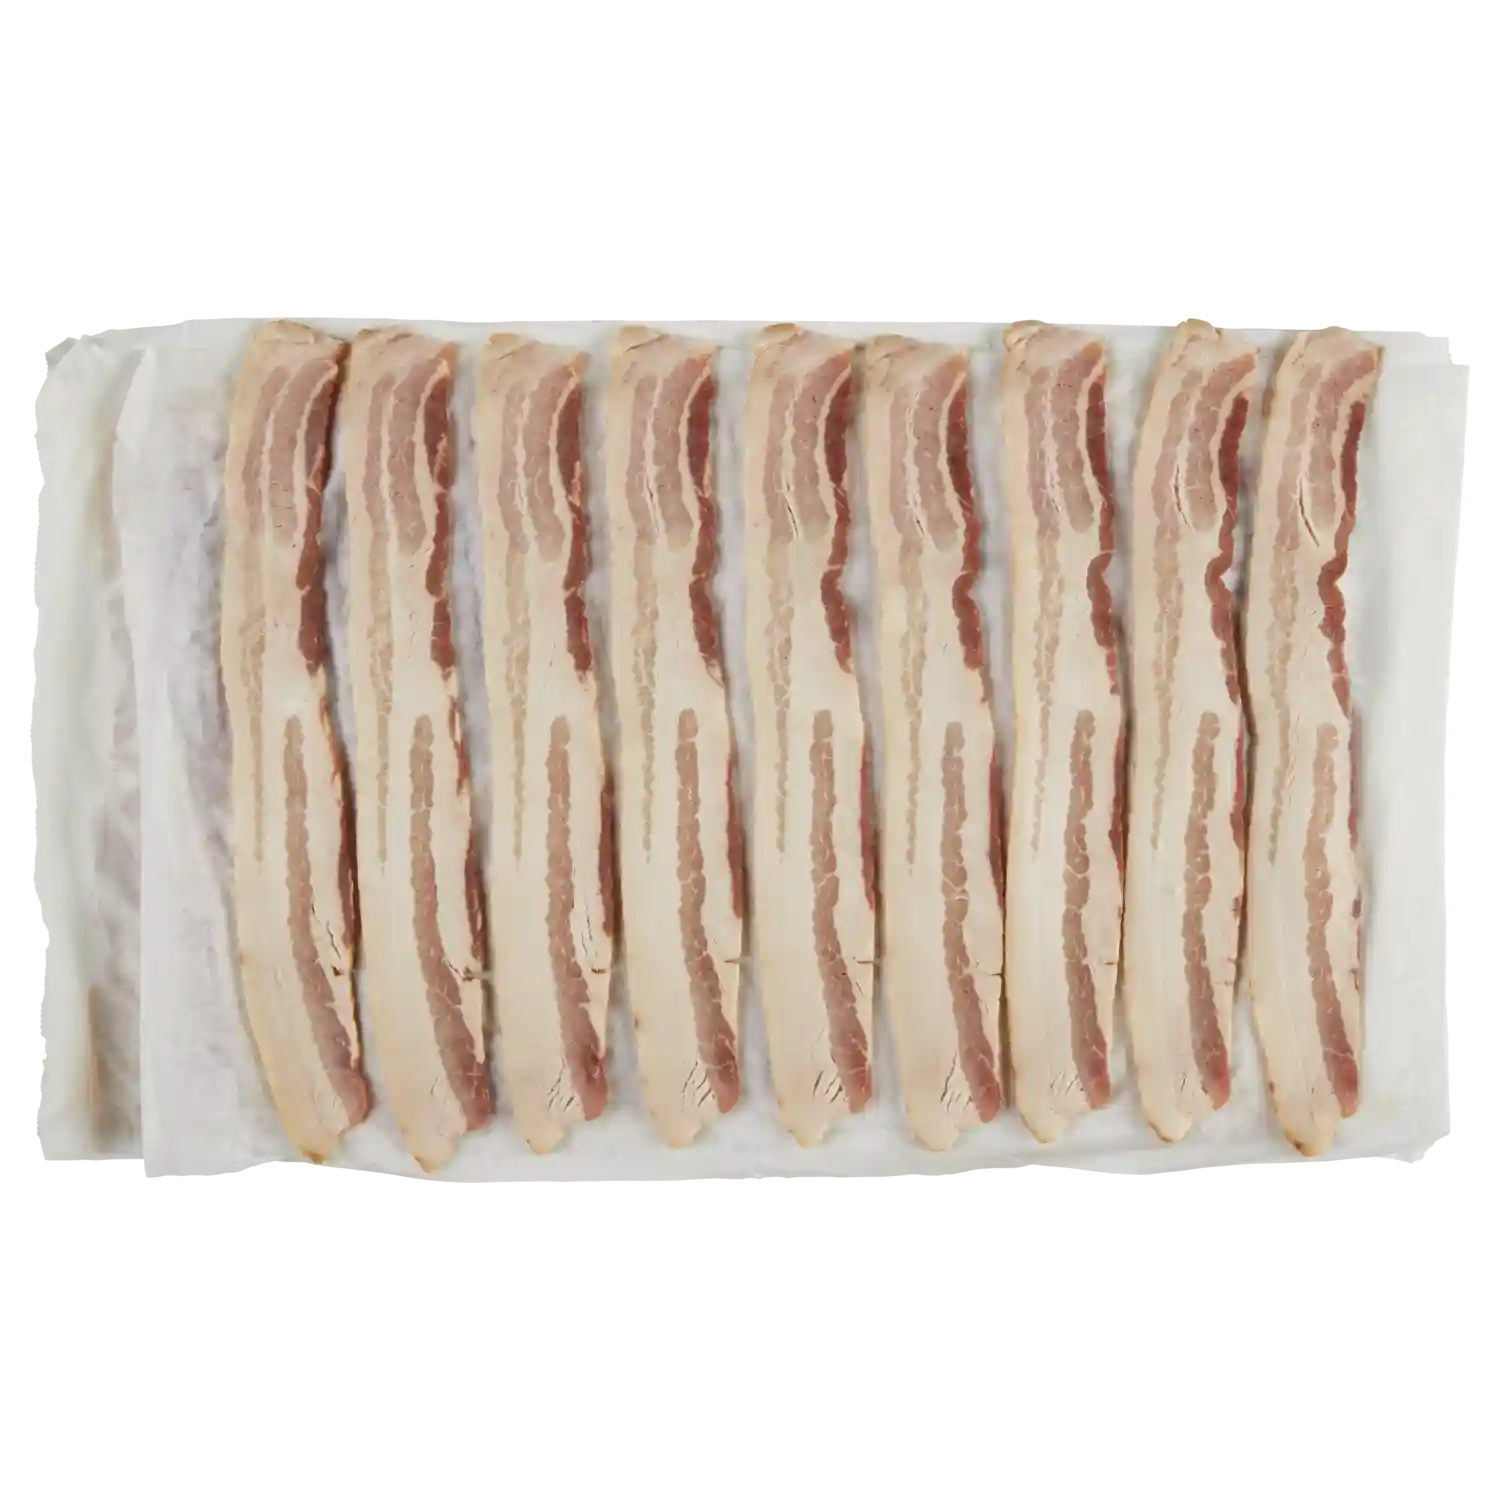 Wright® Brand Naturally Applewood Smoked Thick Sliced Bacon, Flat-Pack®,  15 Lbs, 10-14 Slices per Pound, Frozen_image_31